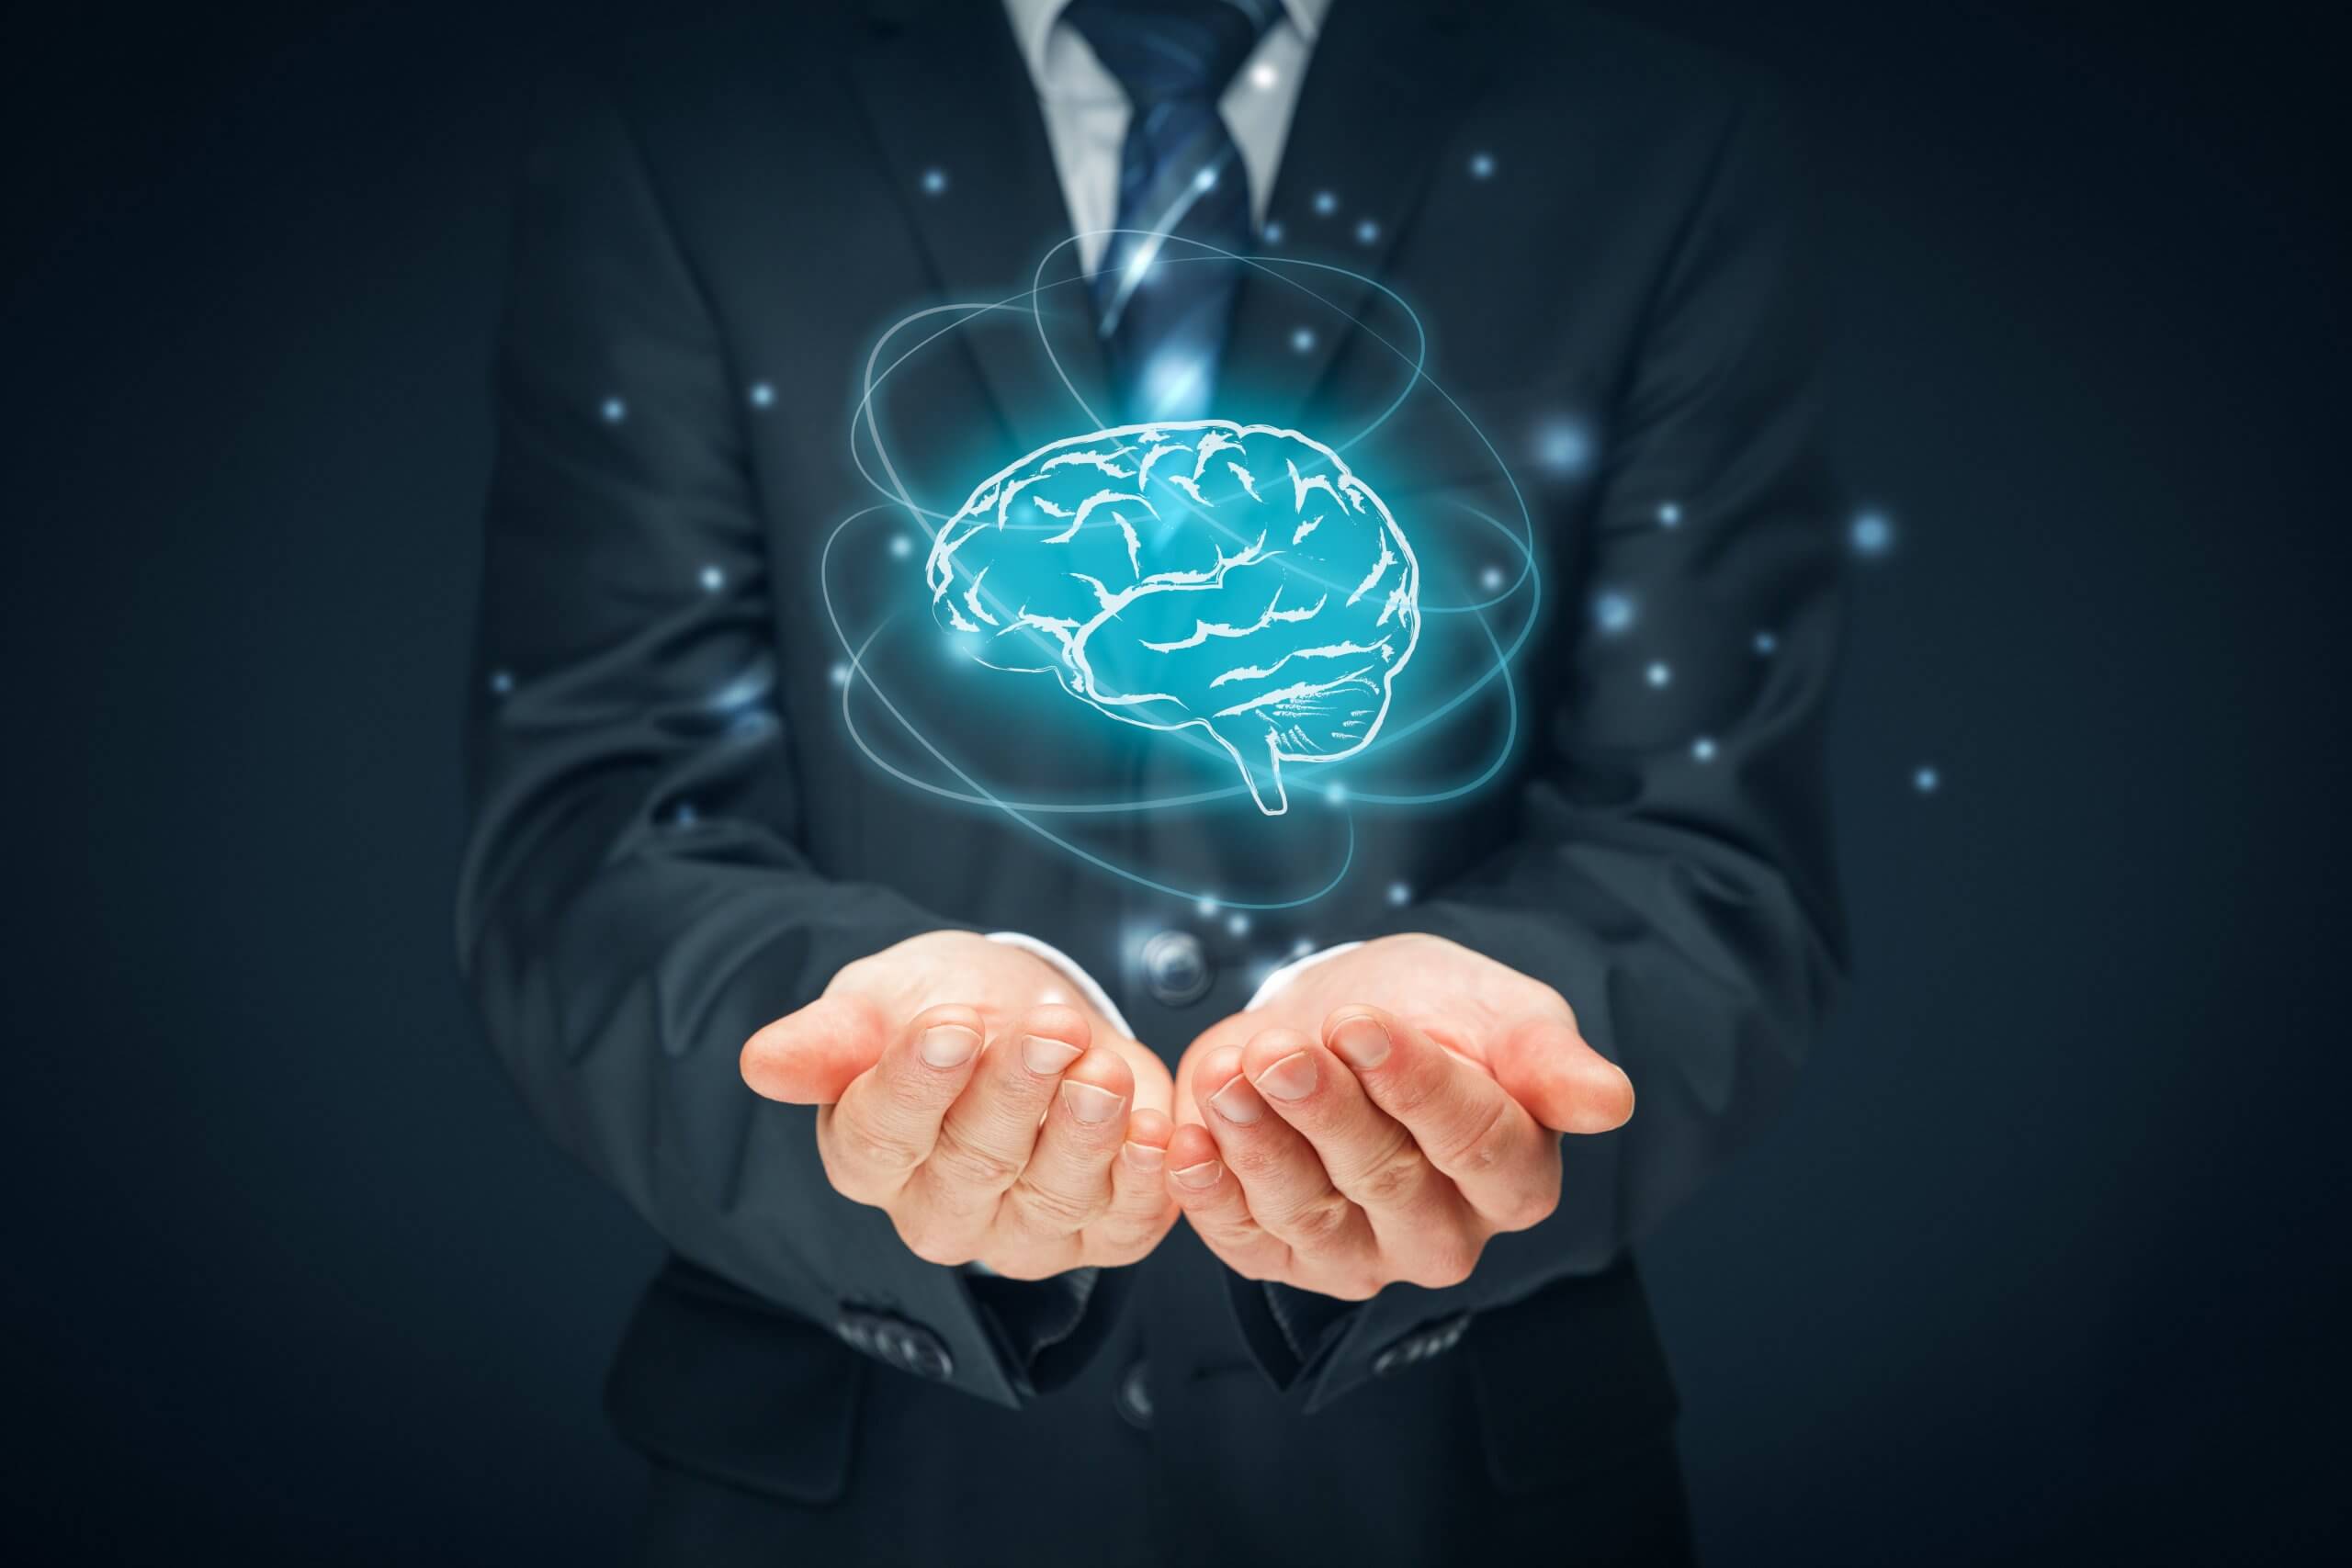 A pair of men's hands held together, facing upwards with a graphic of a brain floating above them.